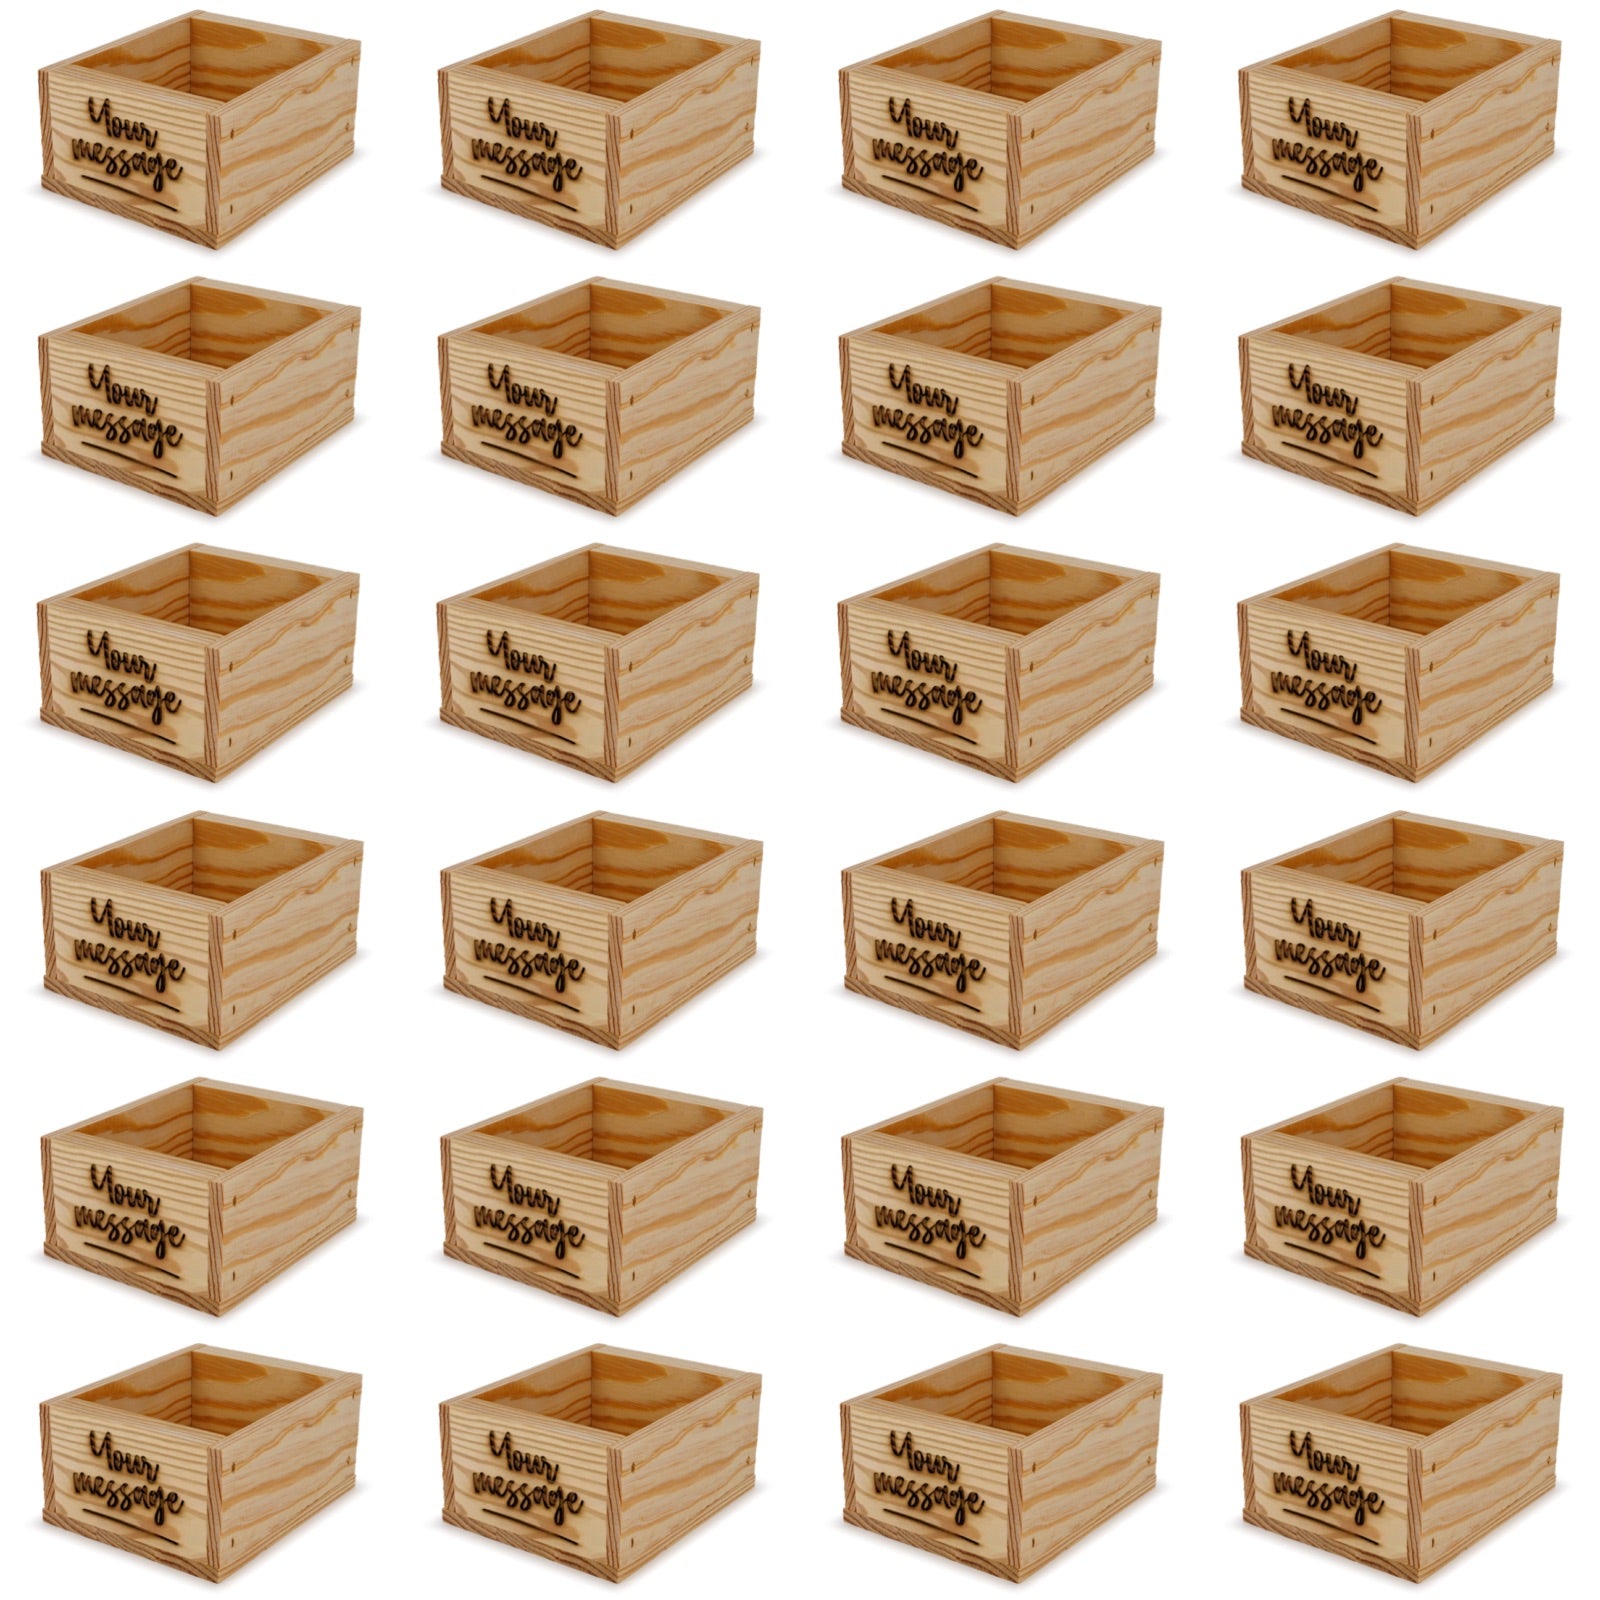 24 Small wooden crates with custom message 5x4.5x2.75